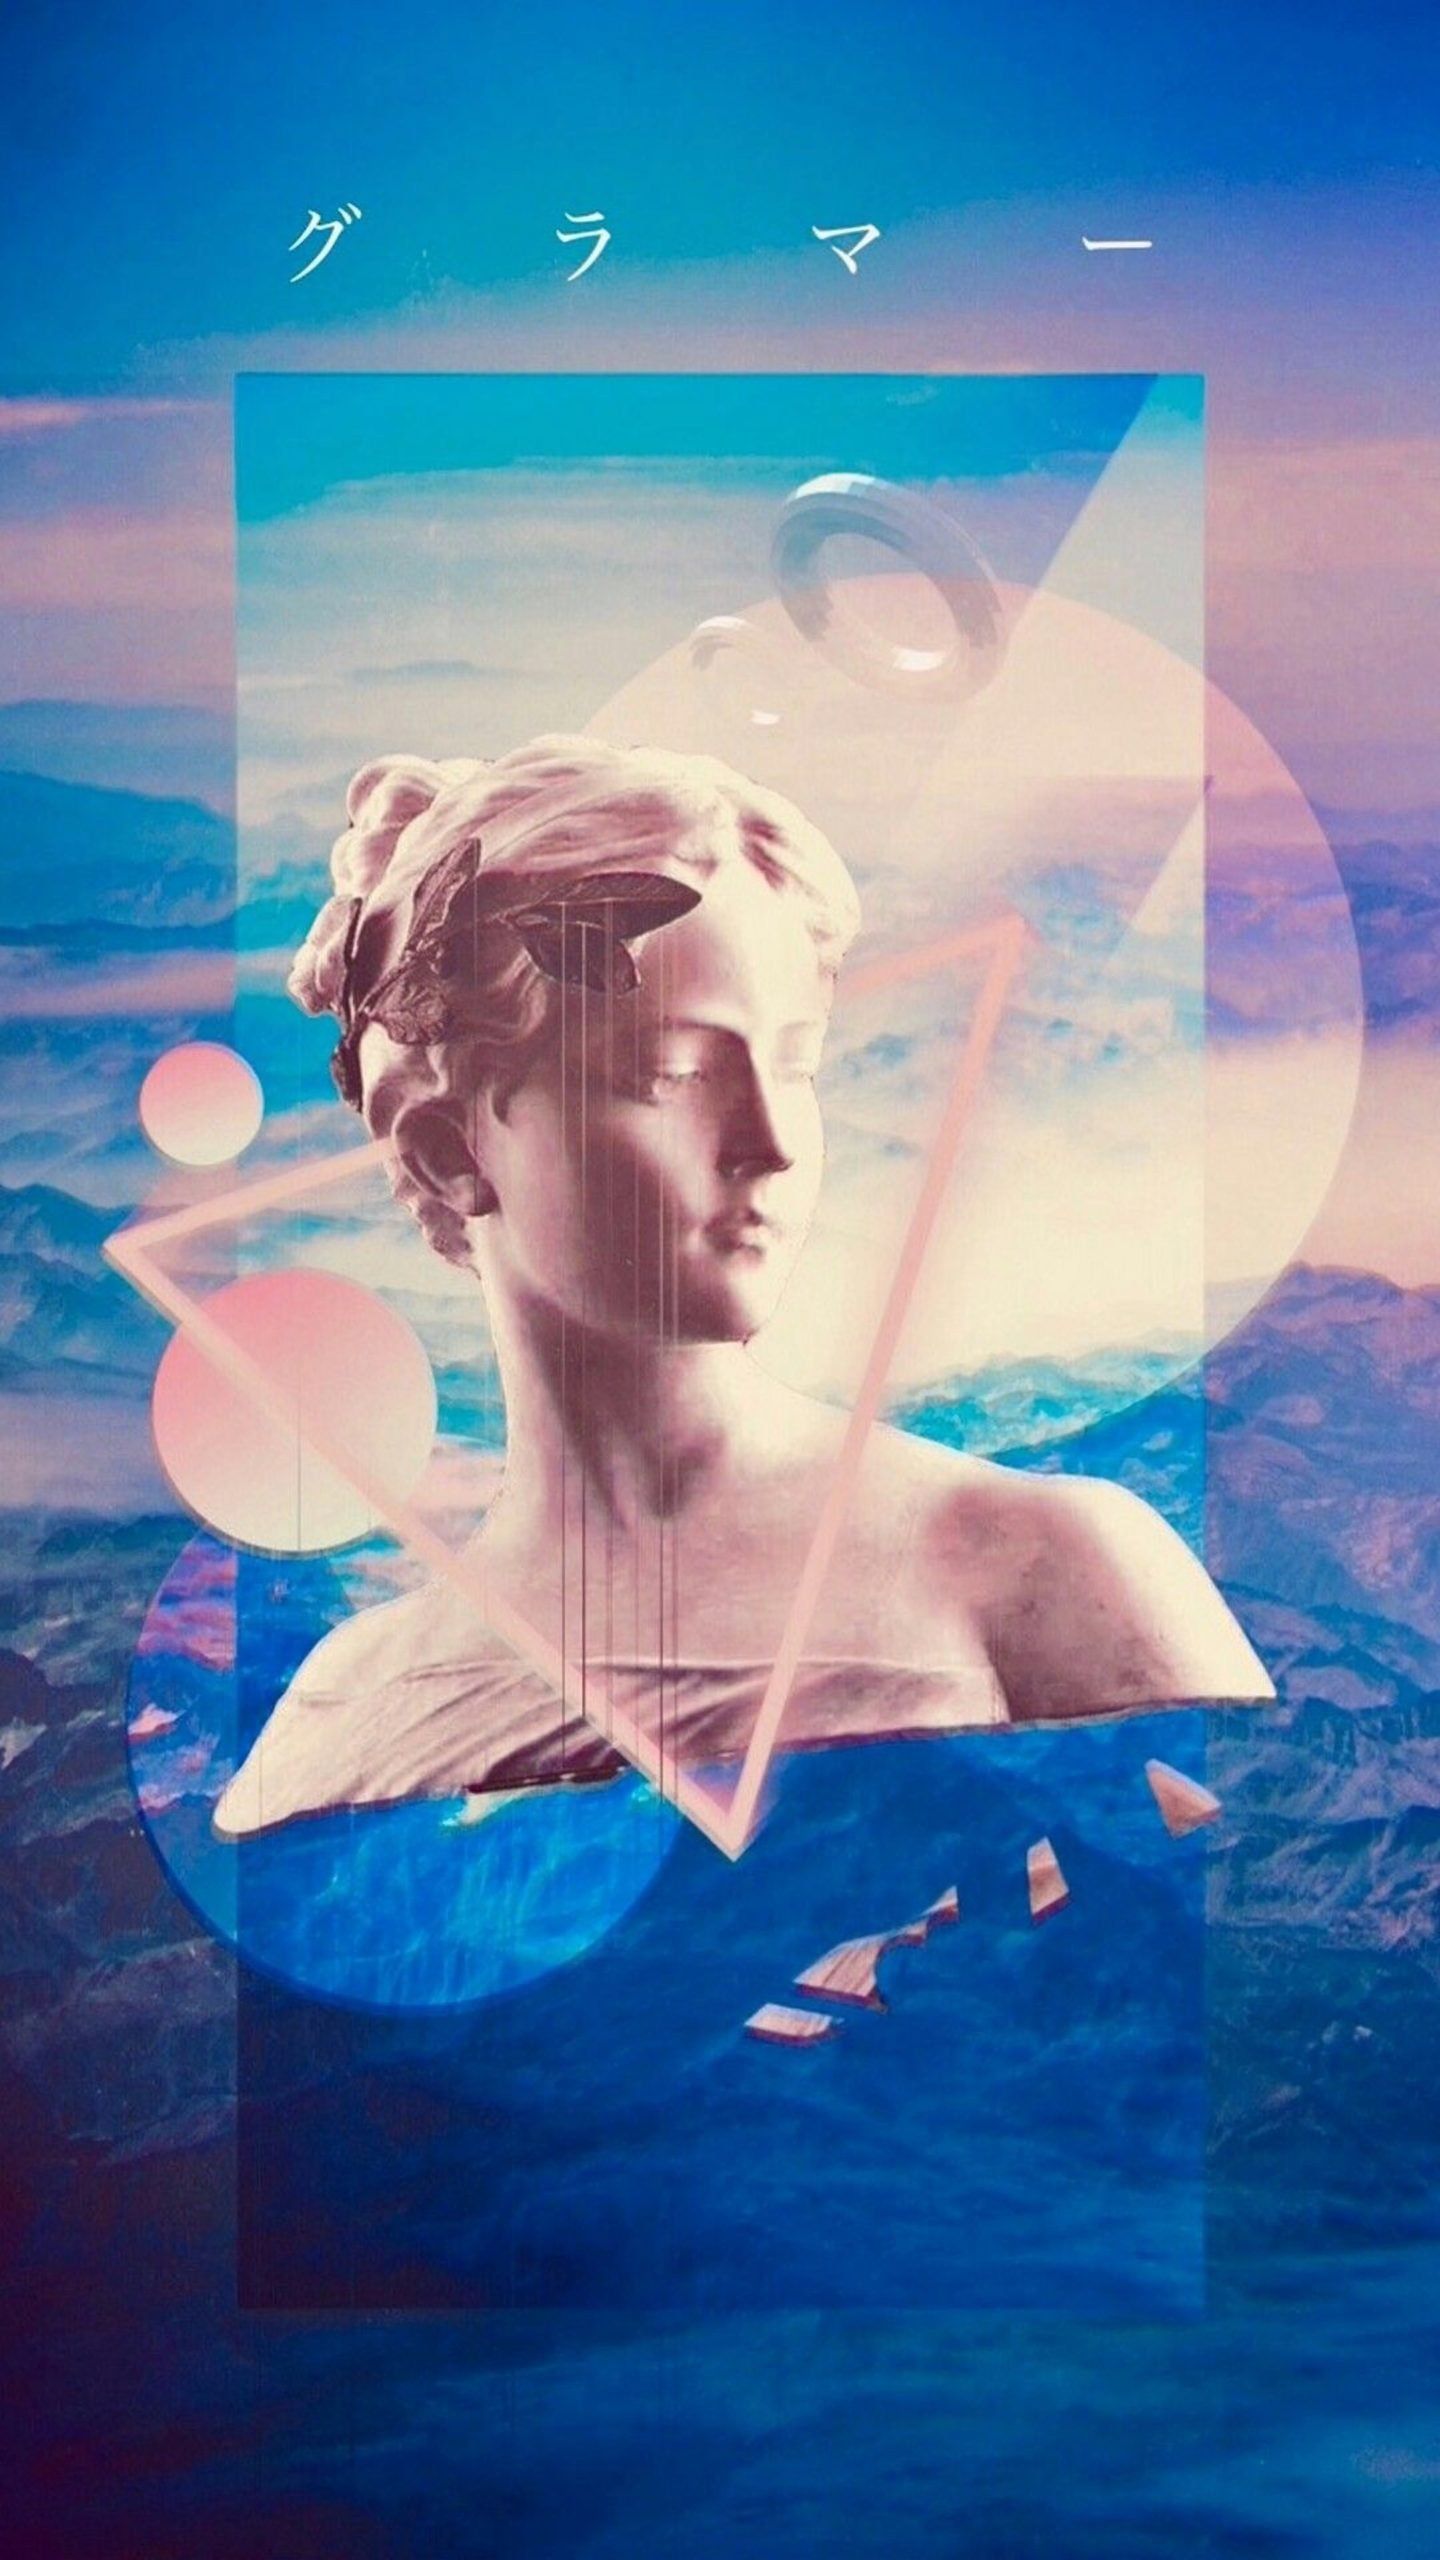 A poster with an image of the statue - Vaporwave